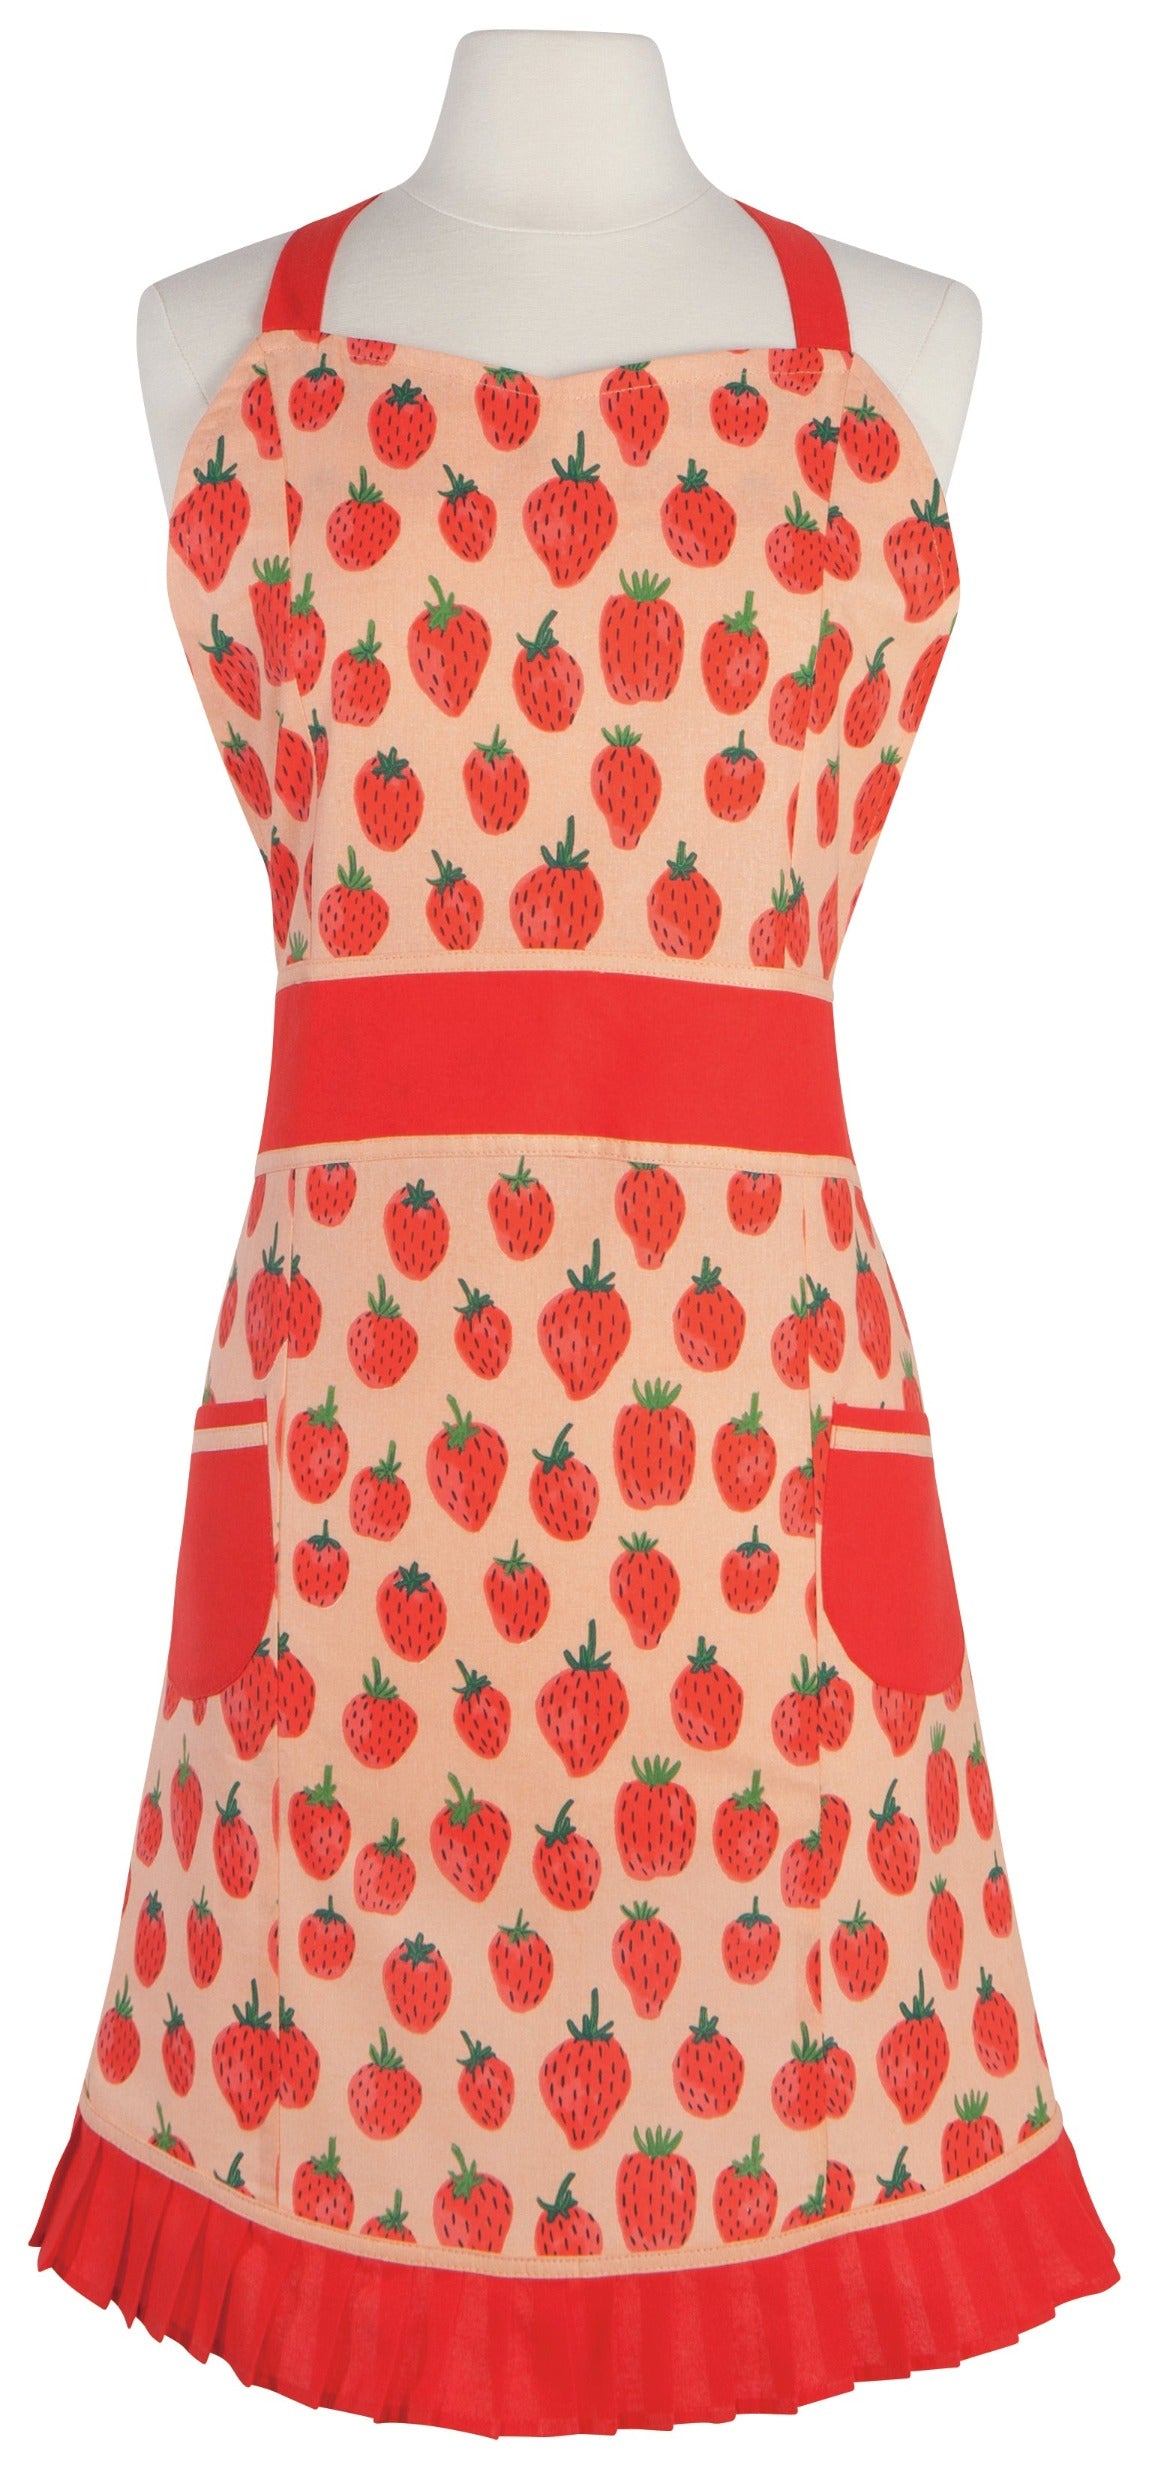 Red and peach apron with strawberries printed on it